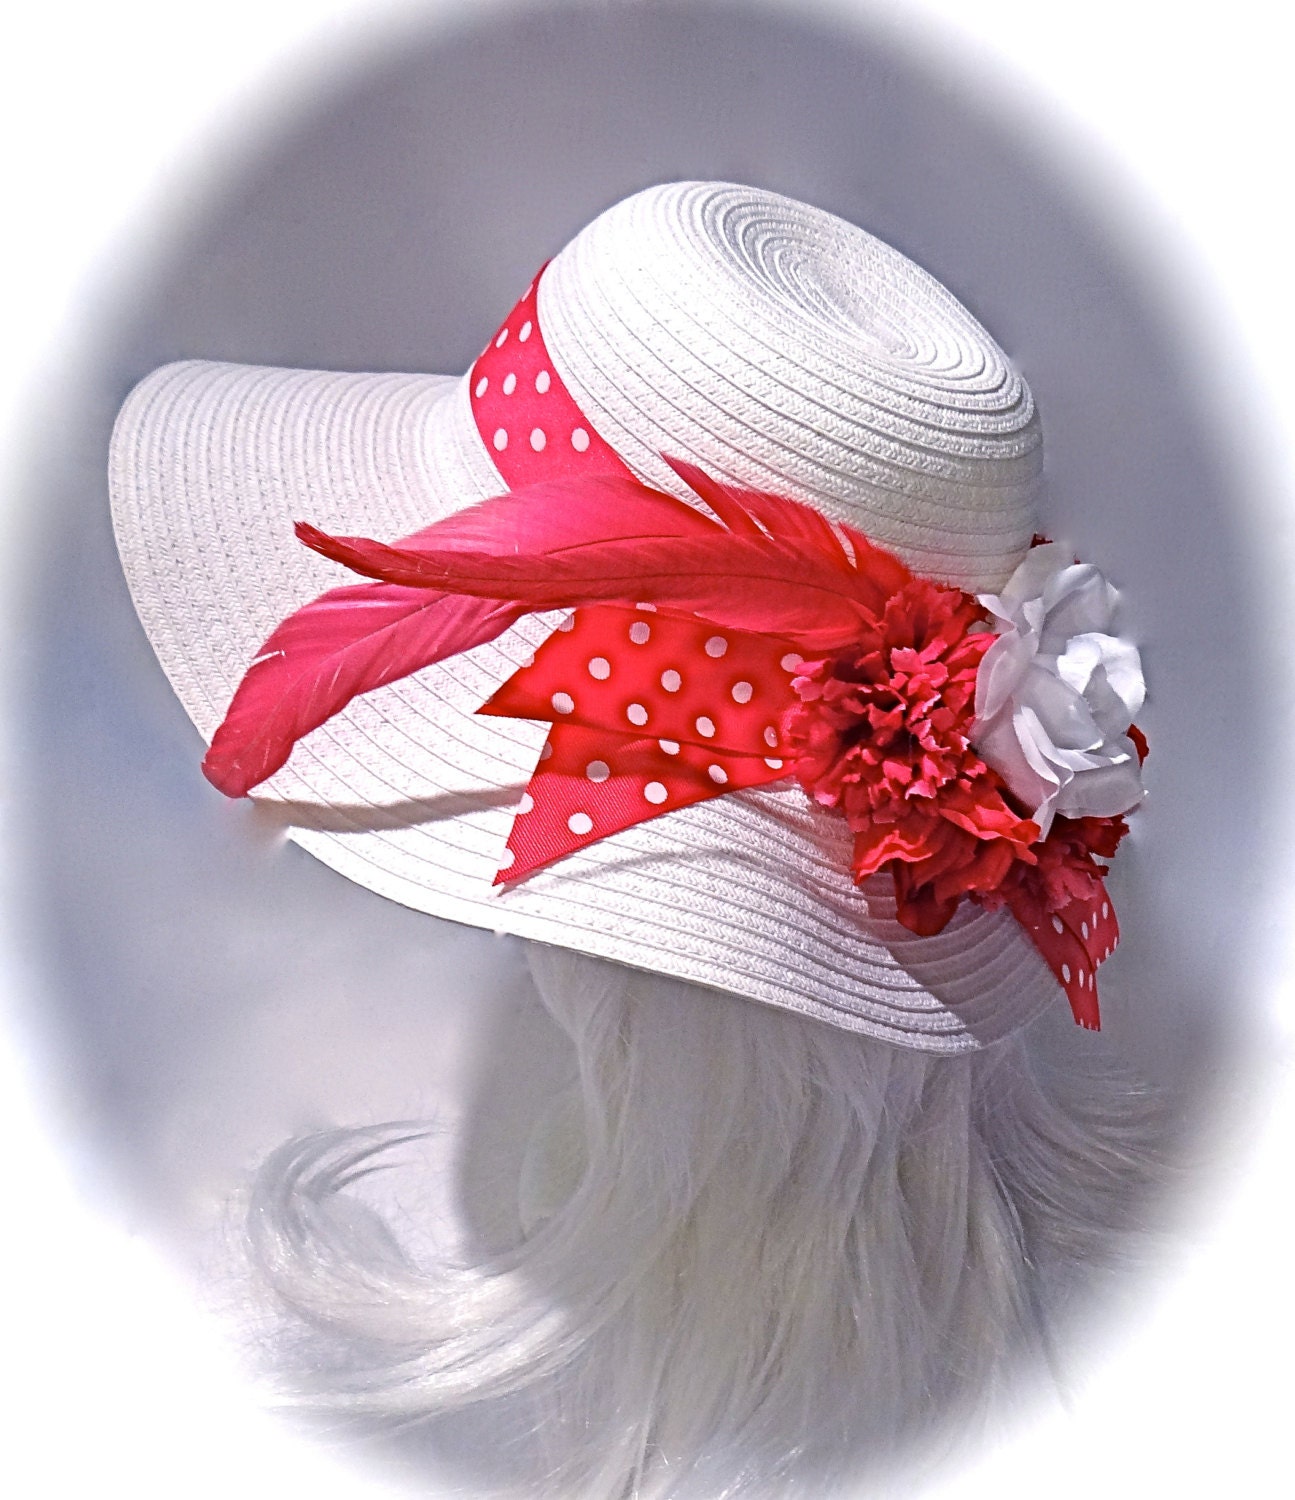 Hot Pink Derby Hat High Fashion Hats Women's by Marcellefinery